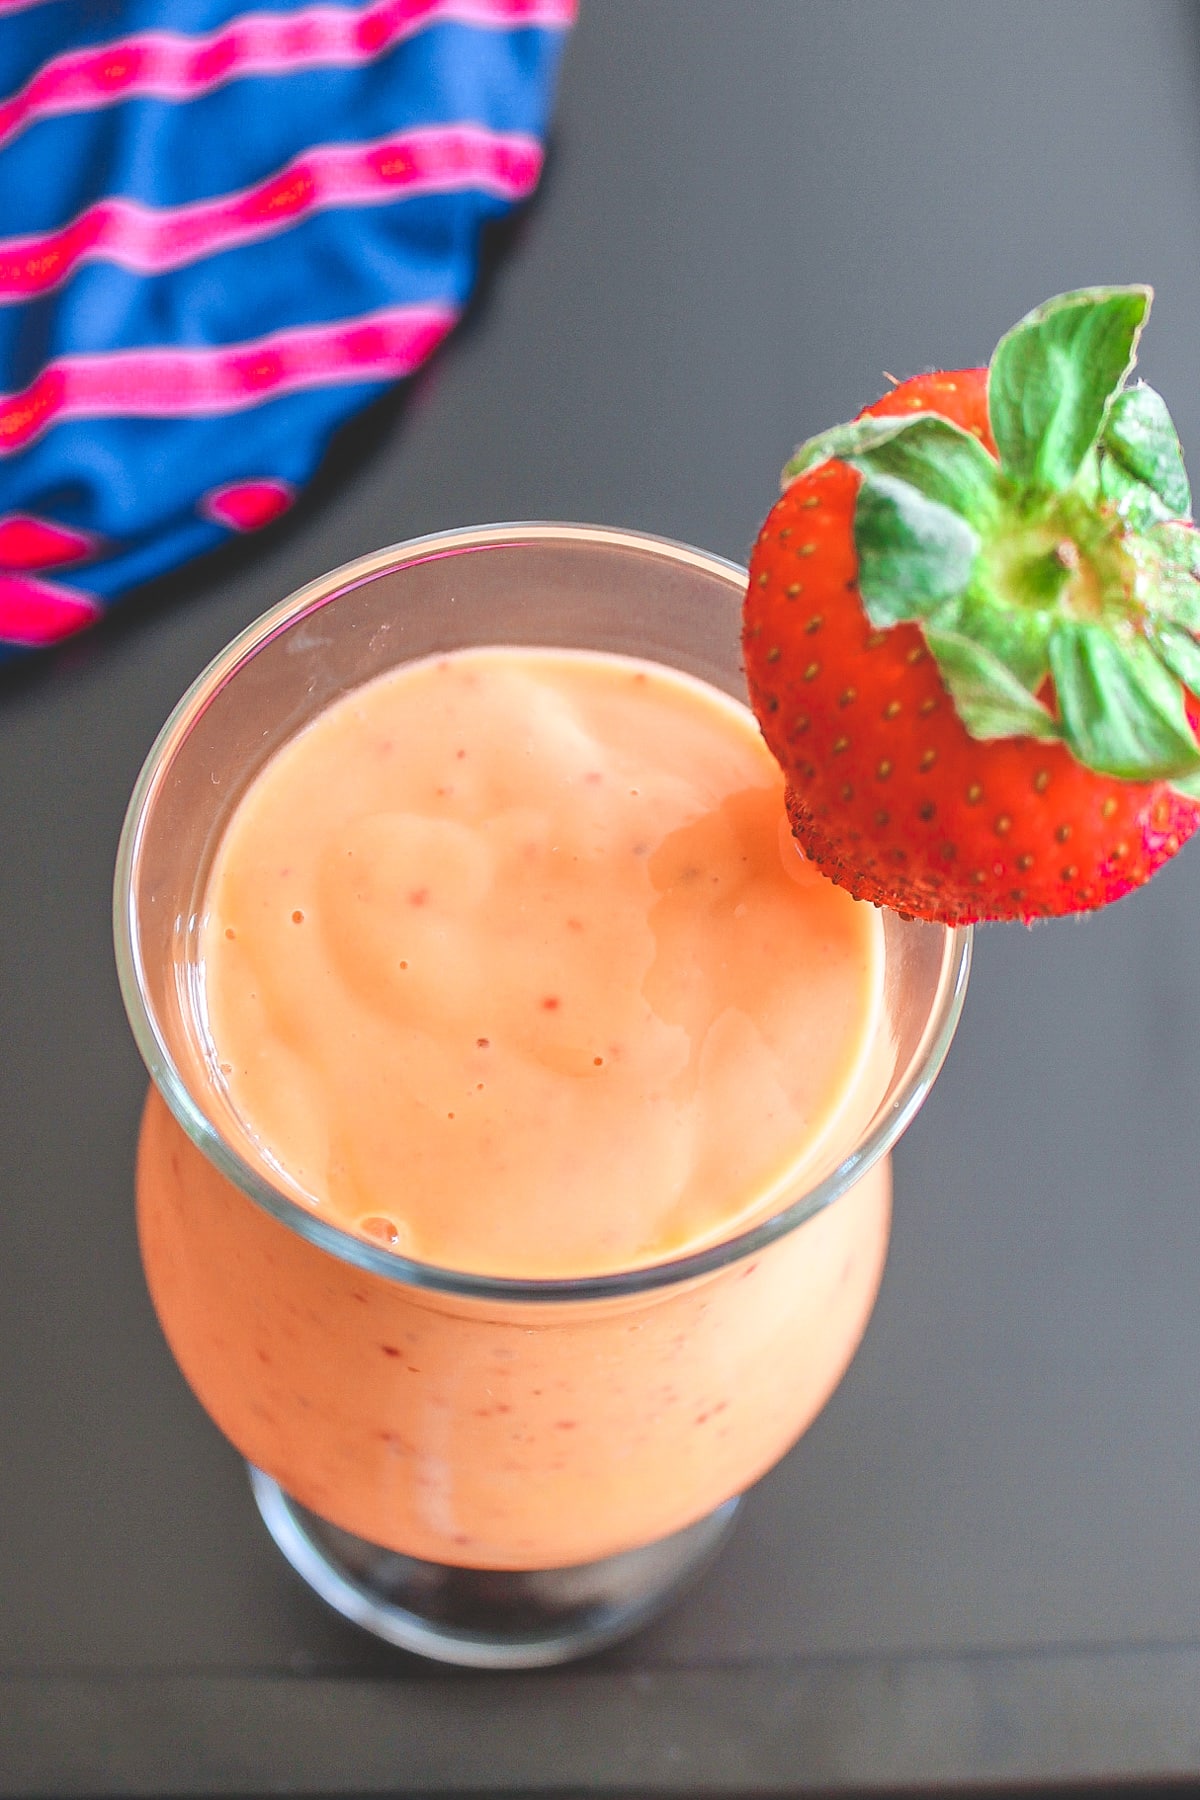 Strawberry mango smoothie in a glass garnish with a strawberry.